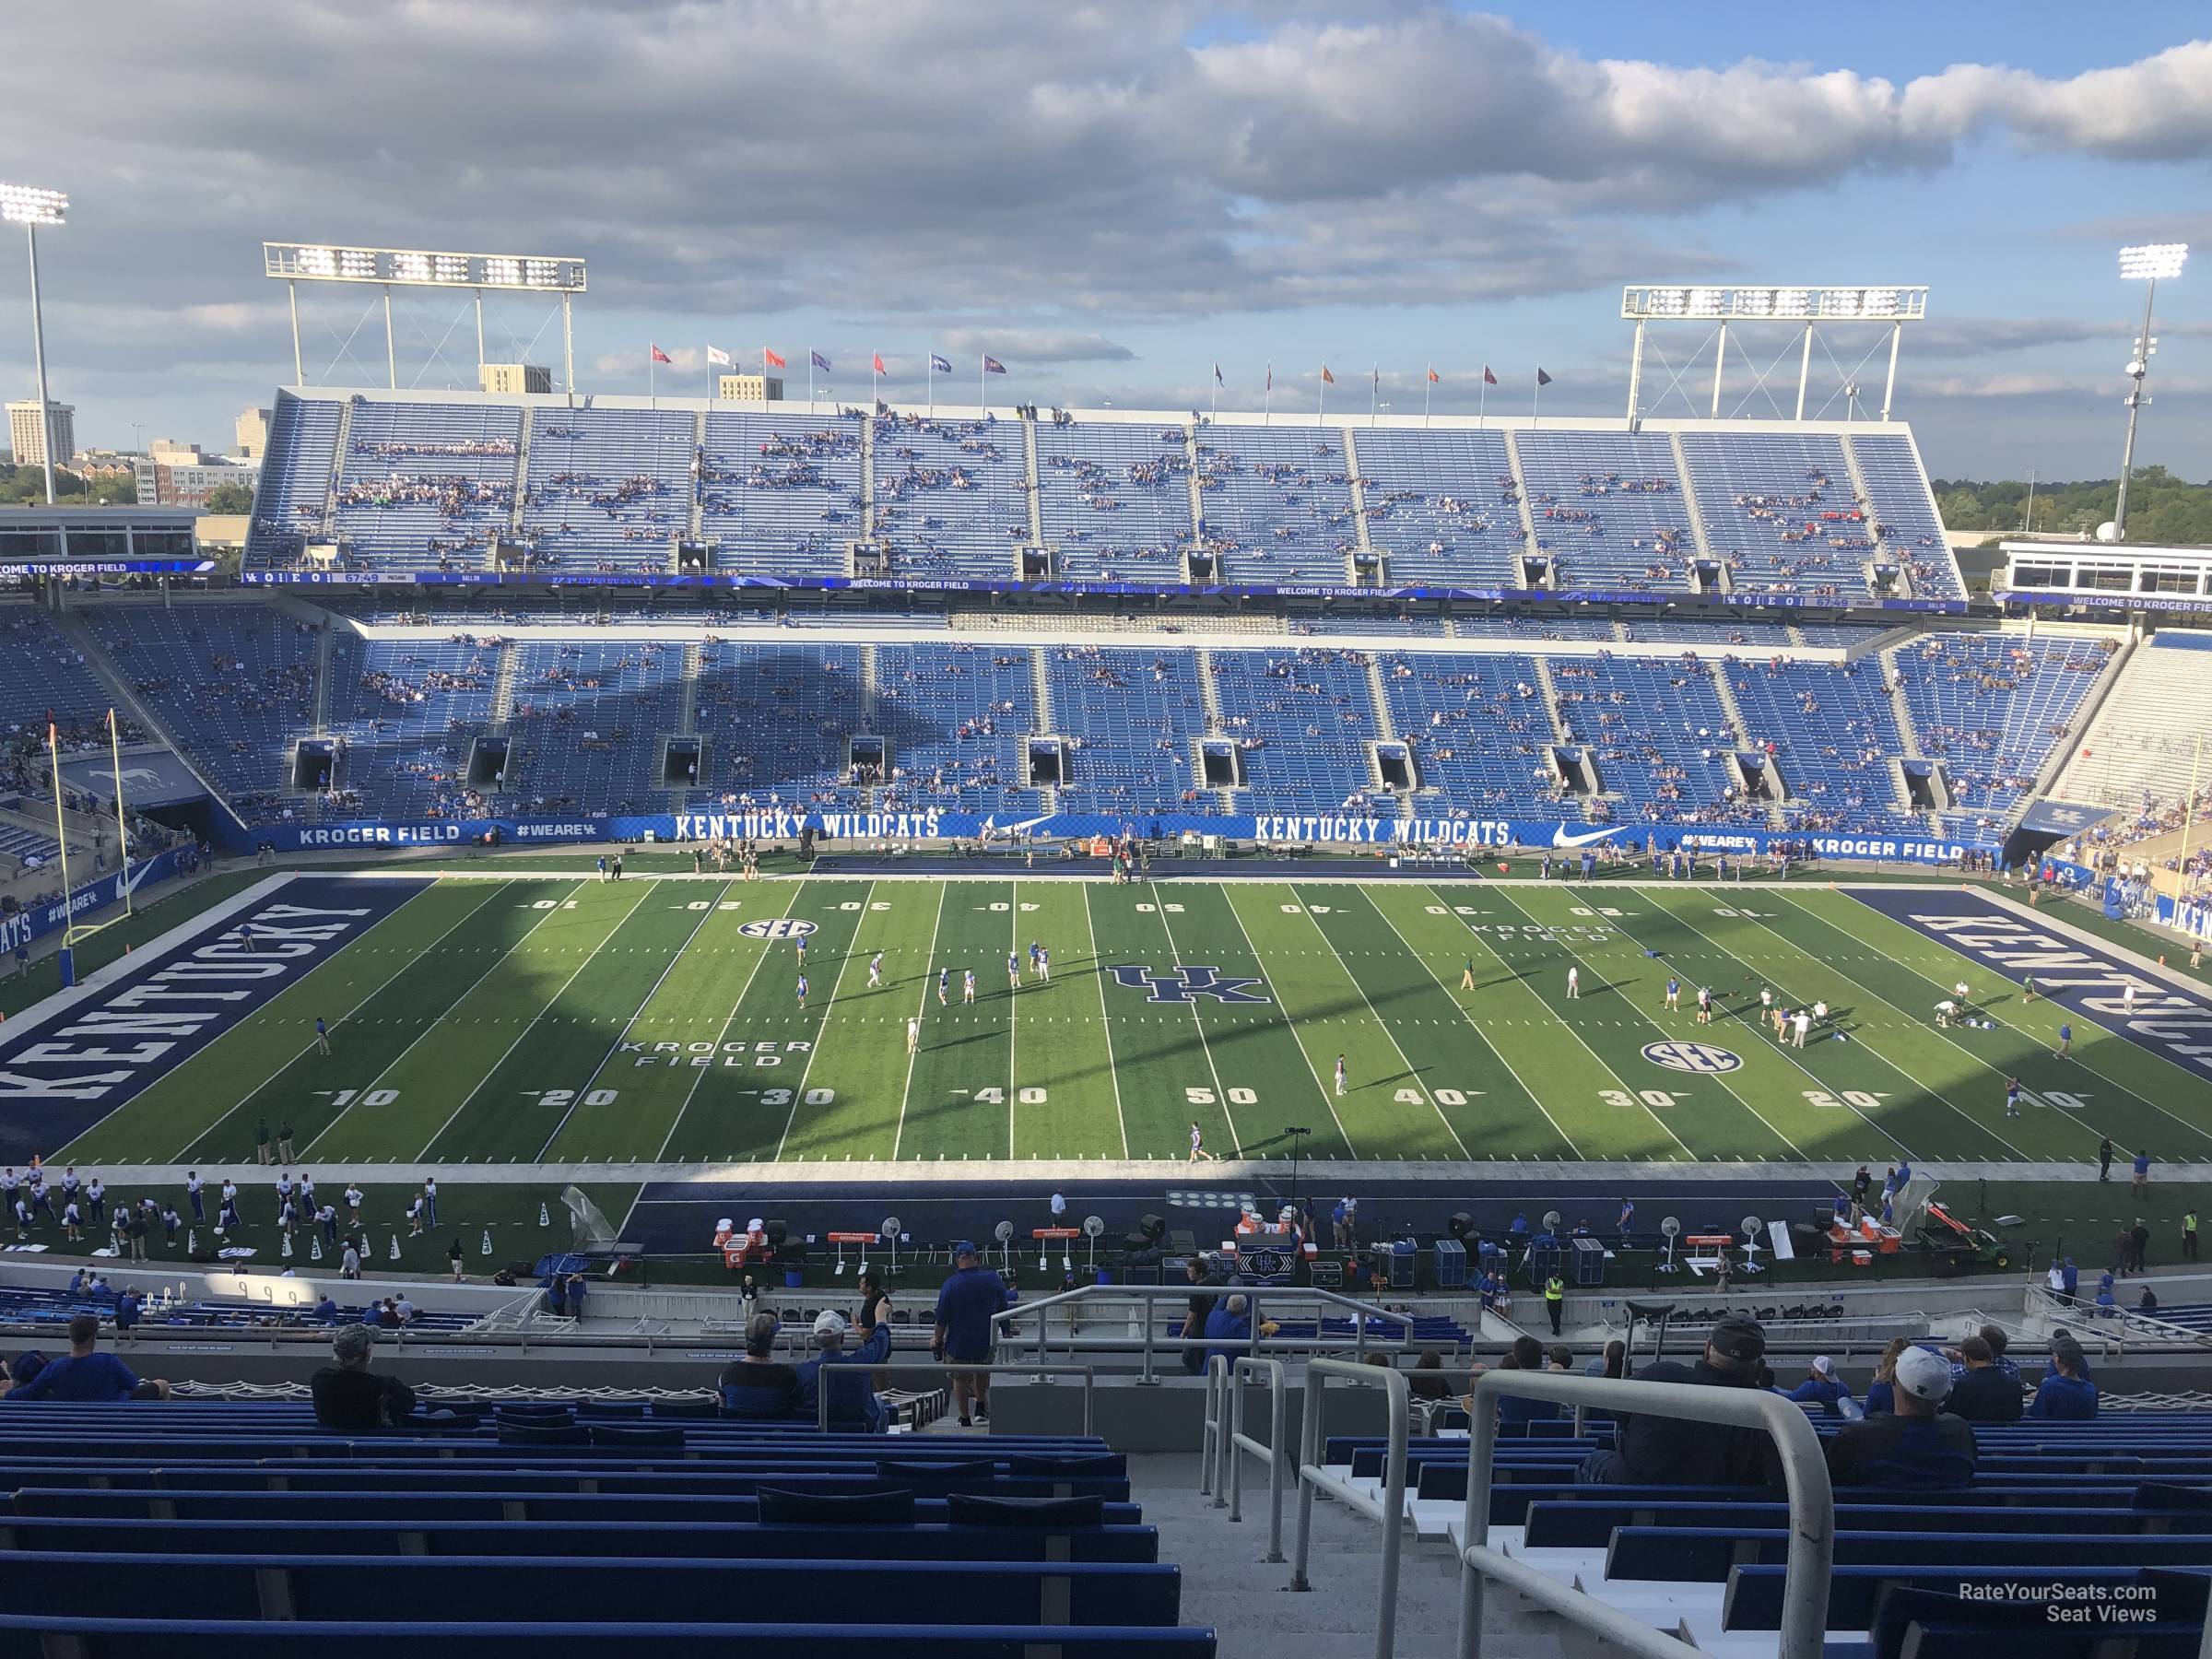 section 225, row 25 seat view  - kroger field